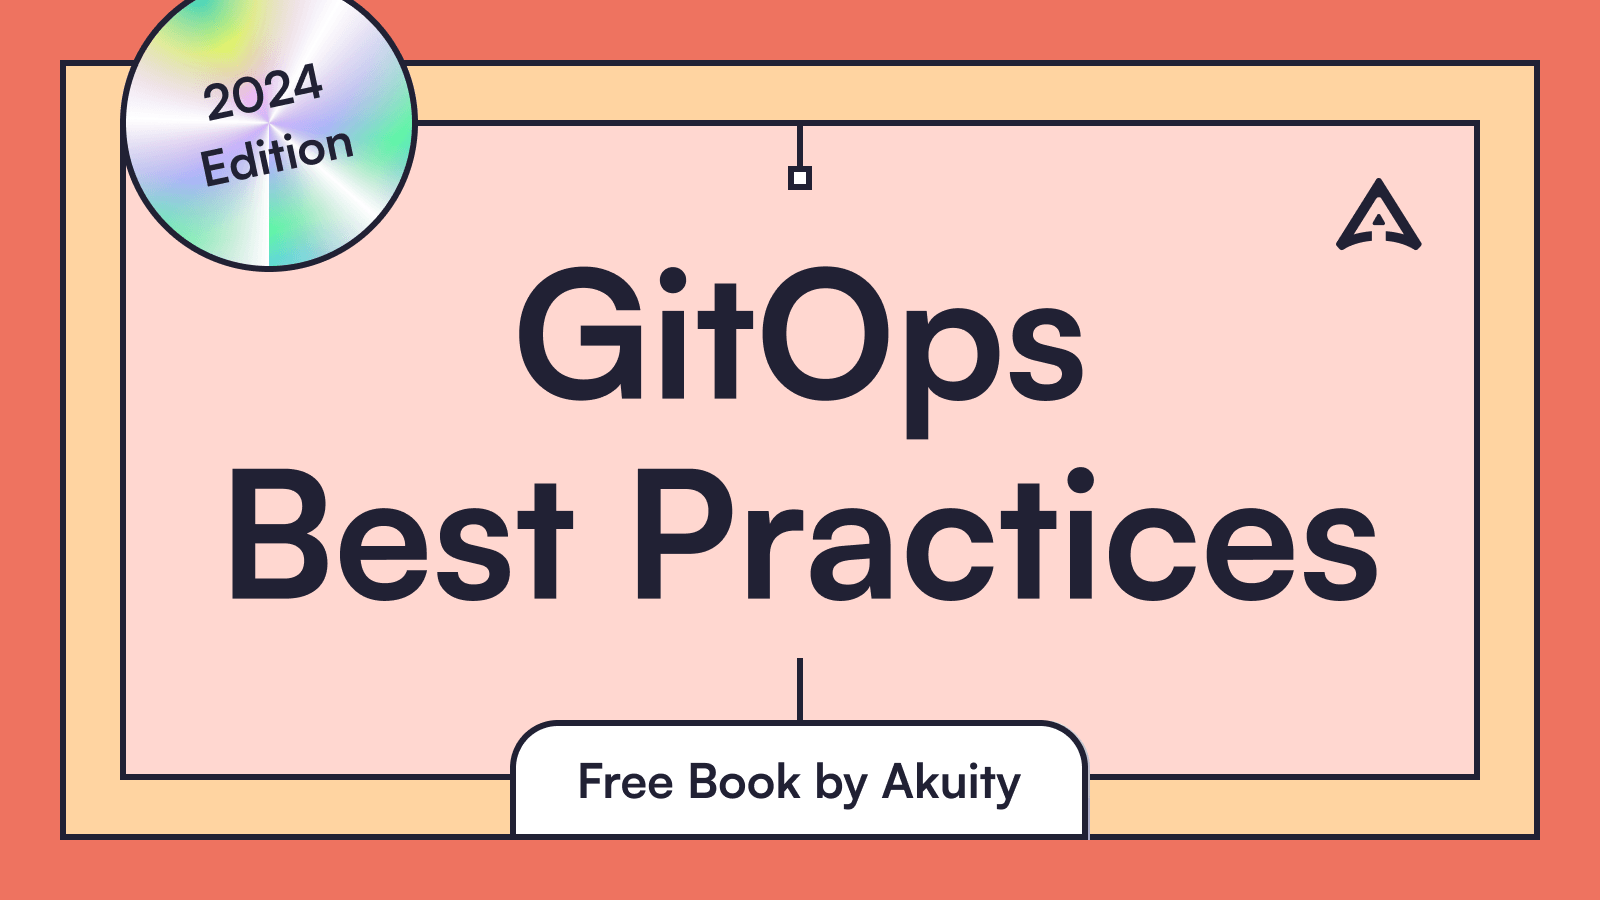 GitOps Best Practices Whitepaper Blog Cover Image